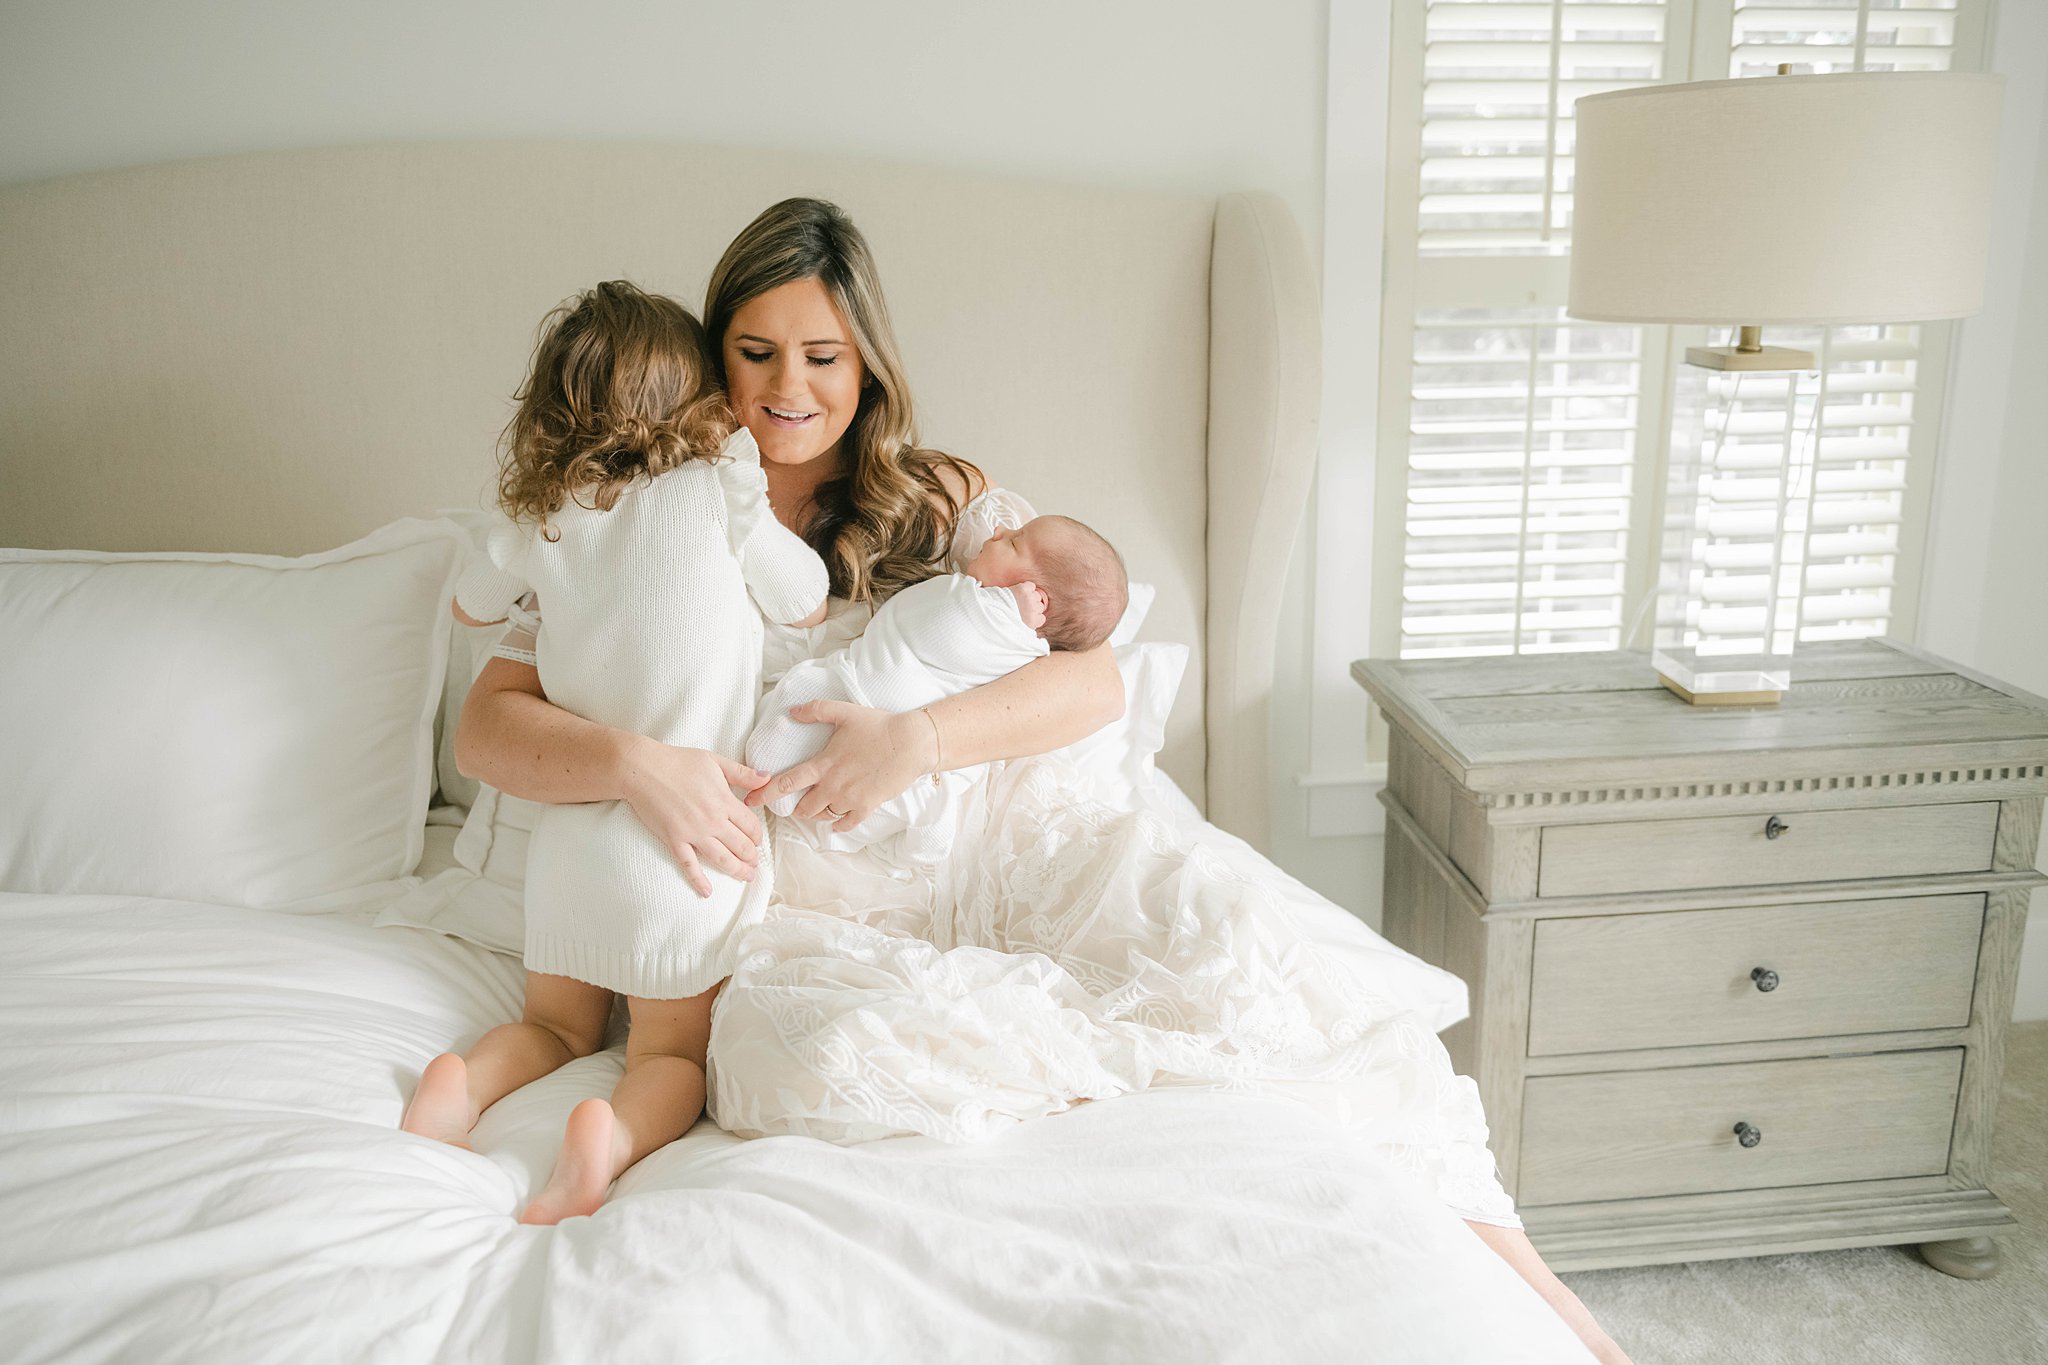 Mother in a white dress gets hugged by her toddler while holding her newborn on a bed Labor of Love Doula Services